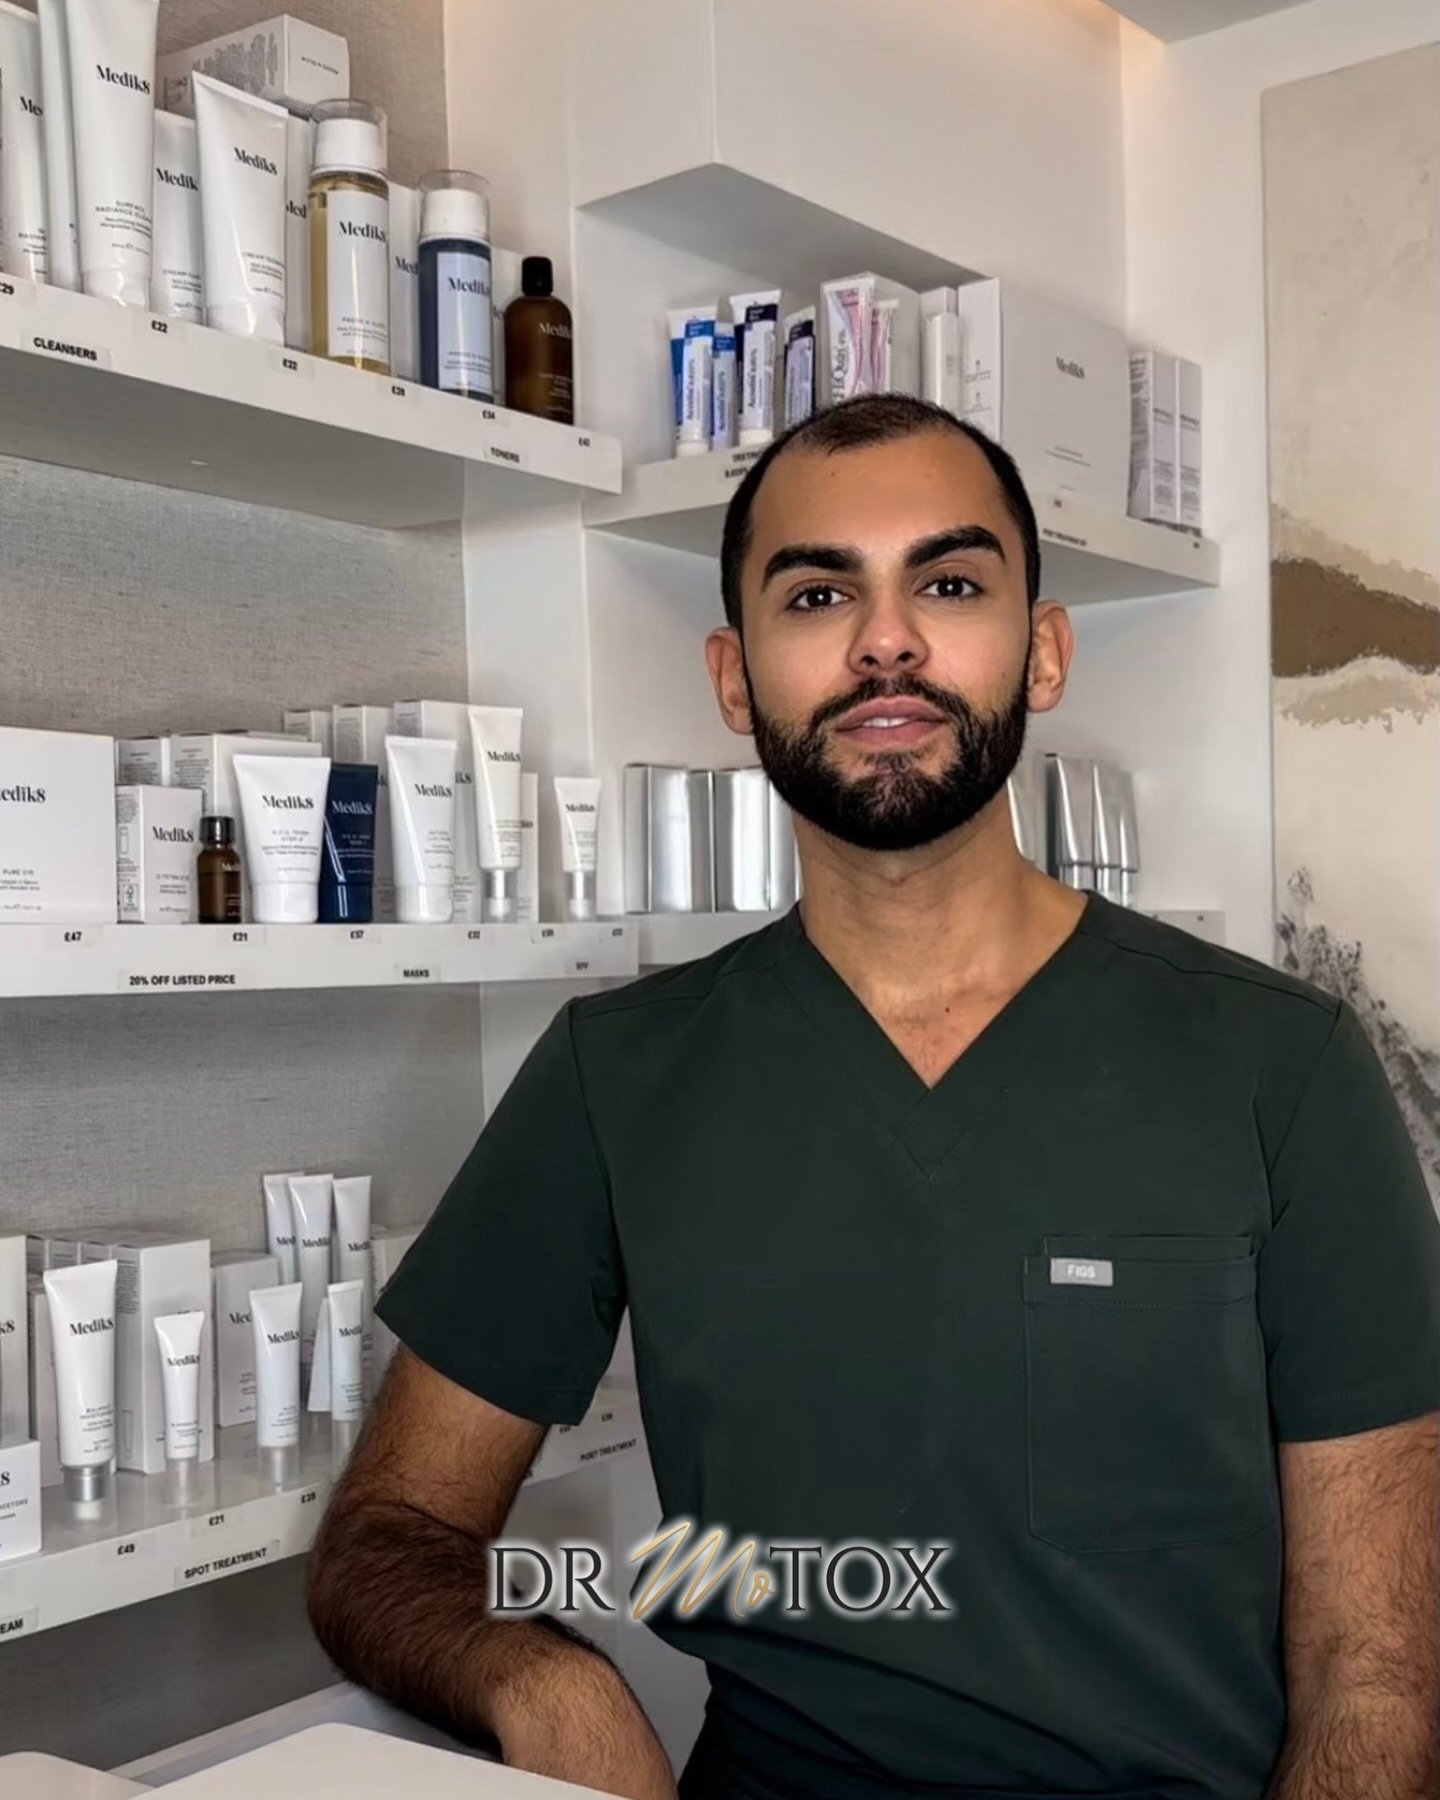 𝐌𝐞𝐝𝐢𝐤𝟖 𝐱 𝐃𝐫 𝐌𝐨𝐭𝐨𝐱✨ We stock the results driven clinical skincare brand @officialmedik8 at the Dr Motox Clinic Mayfair &amp; believe there is a skincare routine to suit anyone!⁣
⁣
We also integrate Medik8 products into your facial appoin